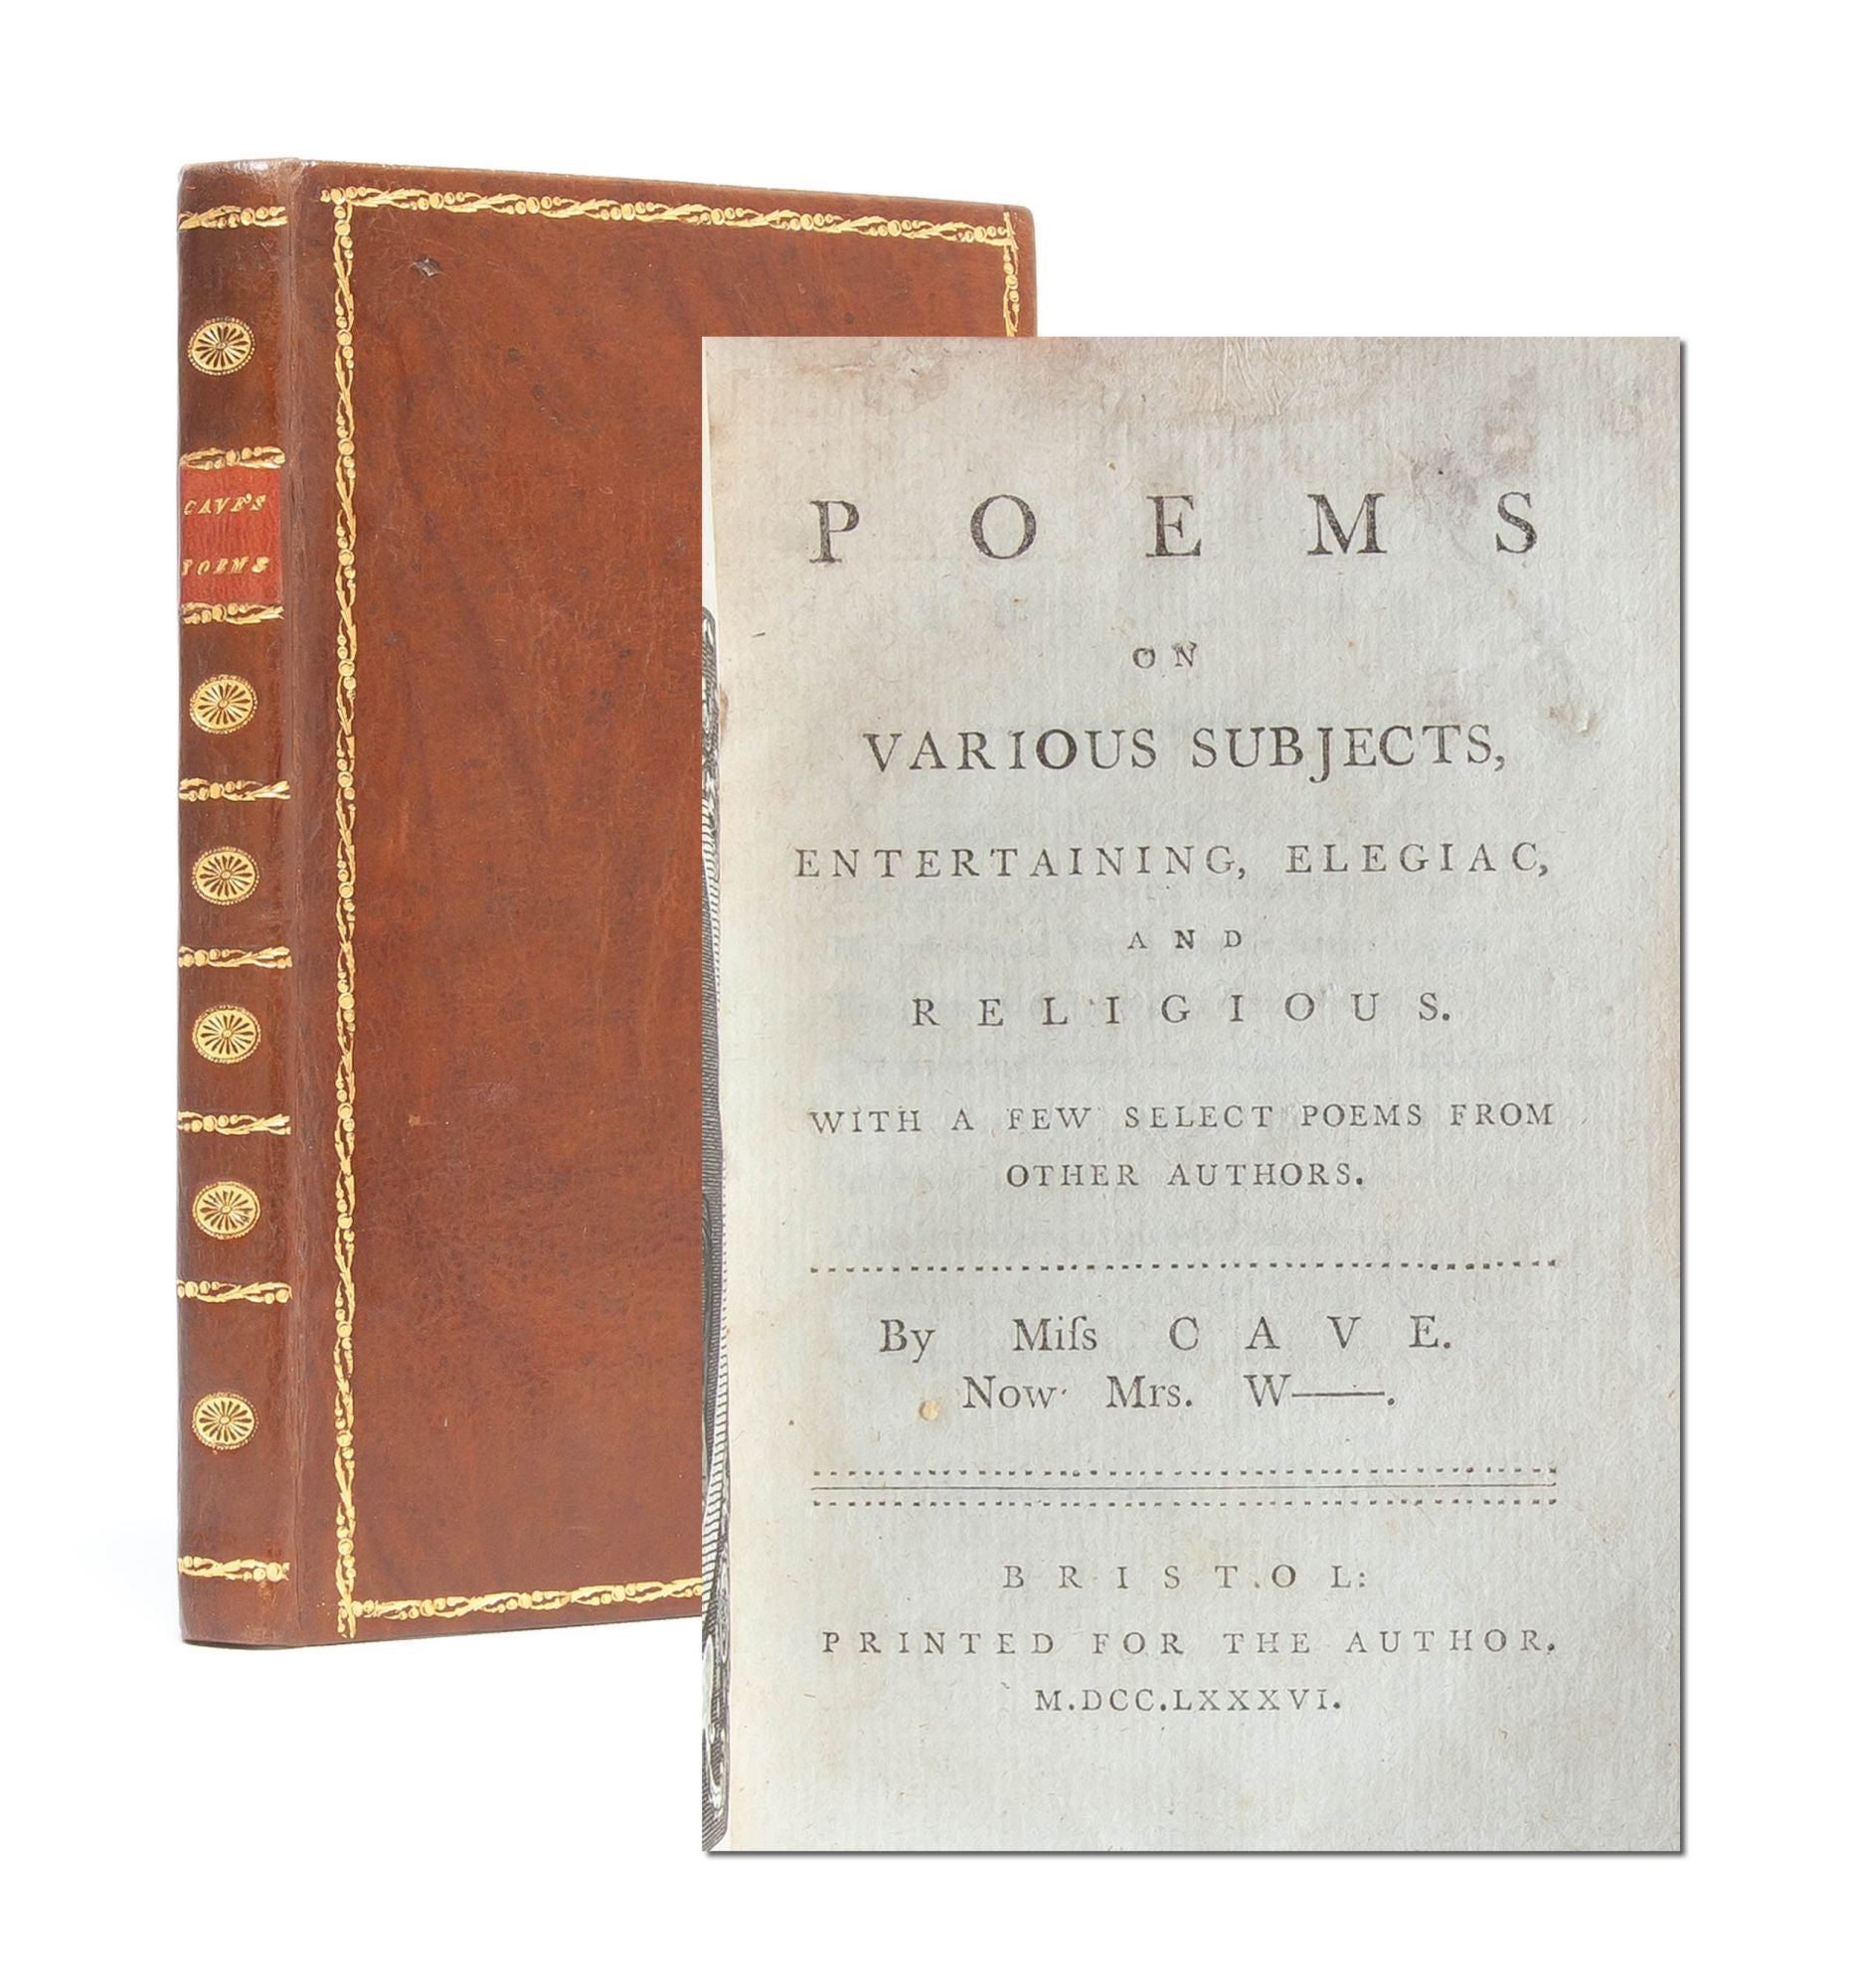 (Item #5412) Poems on Various Subjects, Entertaining, Elegiac, and Religious with a few select poems from other authors. Mrs Jane Winscom, People, Disabilities.